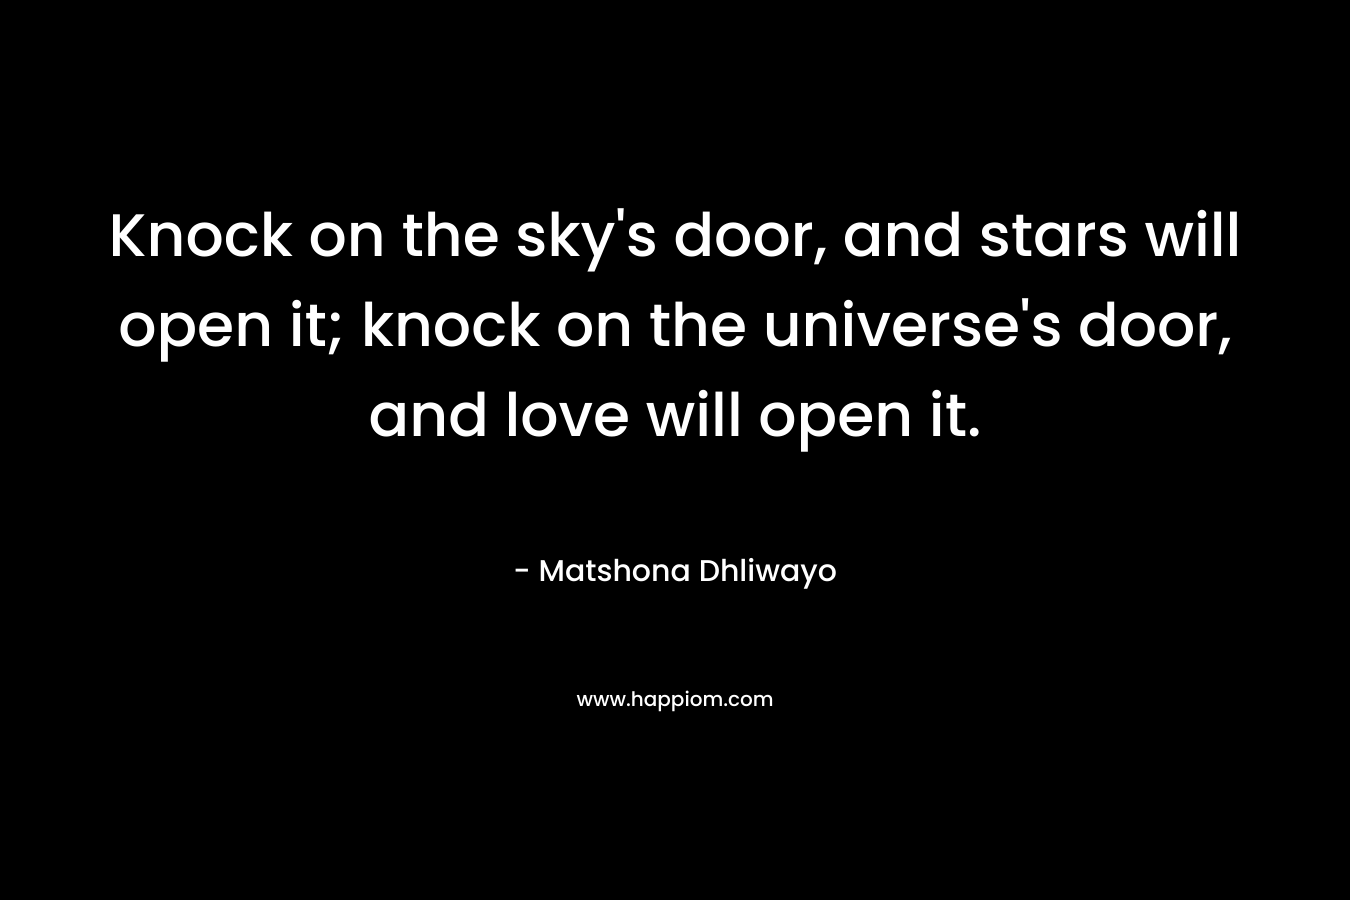 Knock on the sky's door, and stars will open it; knock on the universe's door, and love will open it.